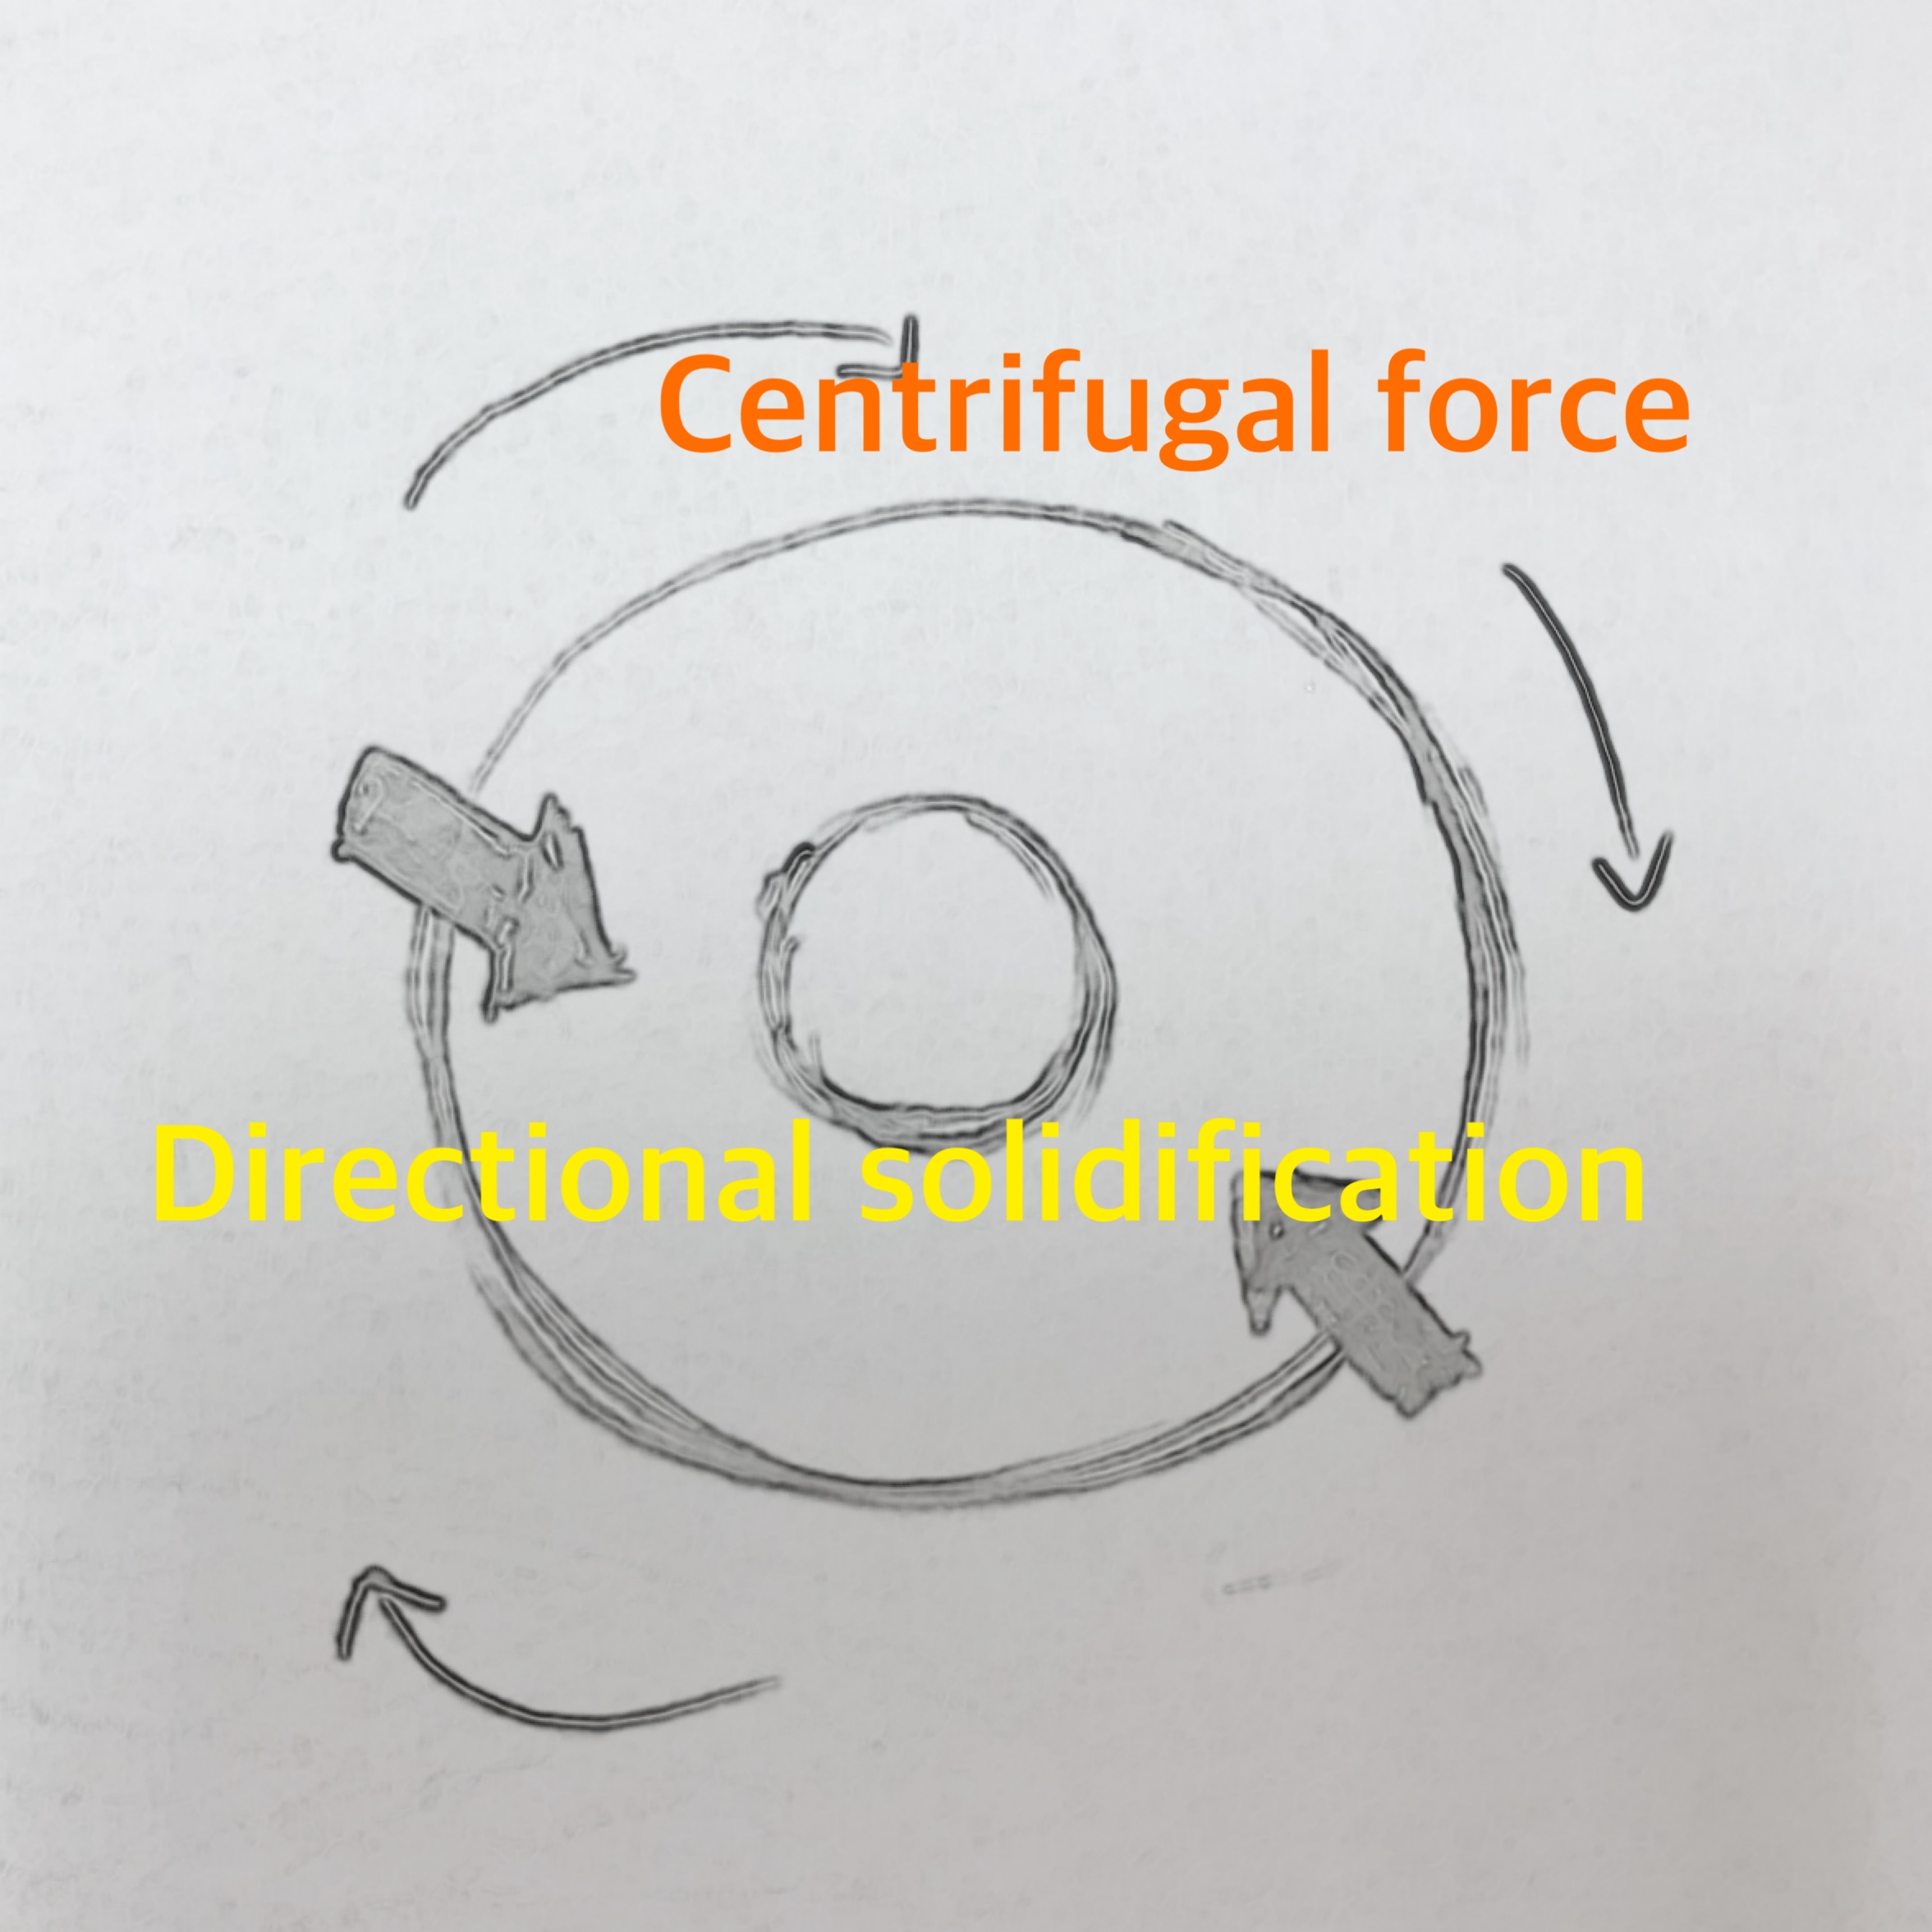 The explanation of what centrifugal casting is